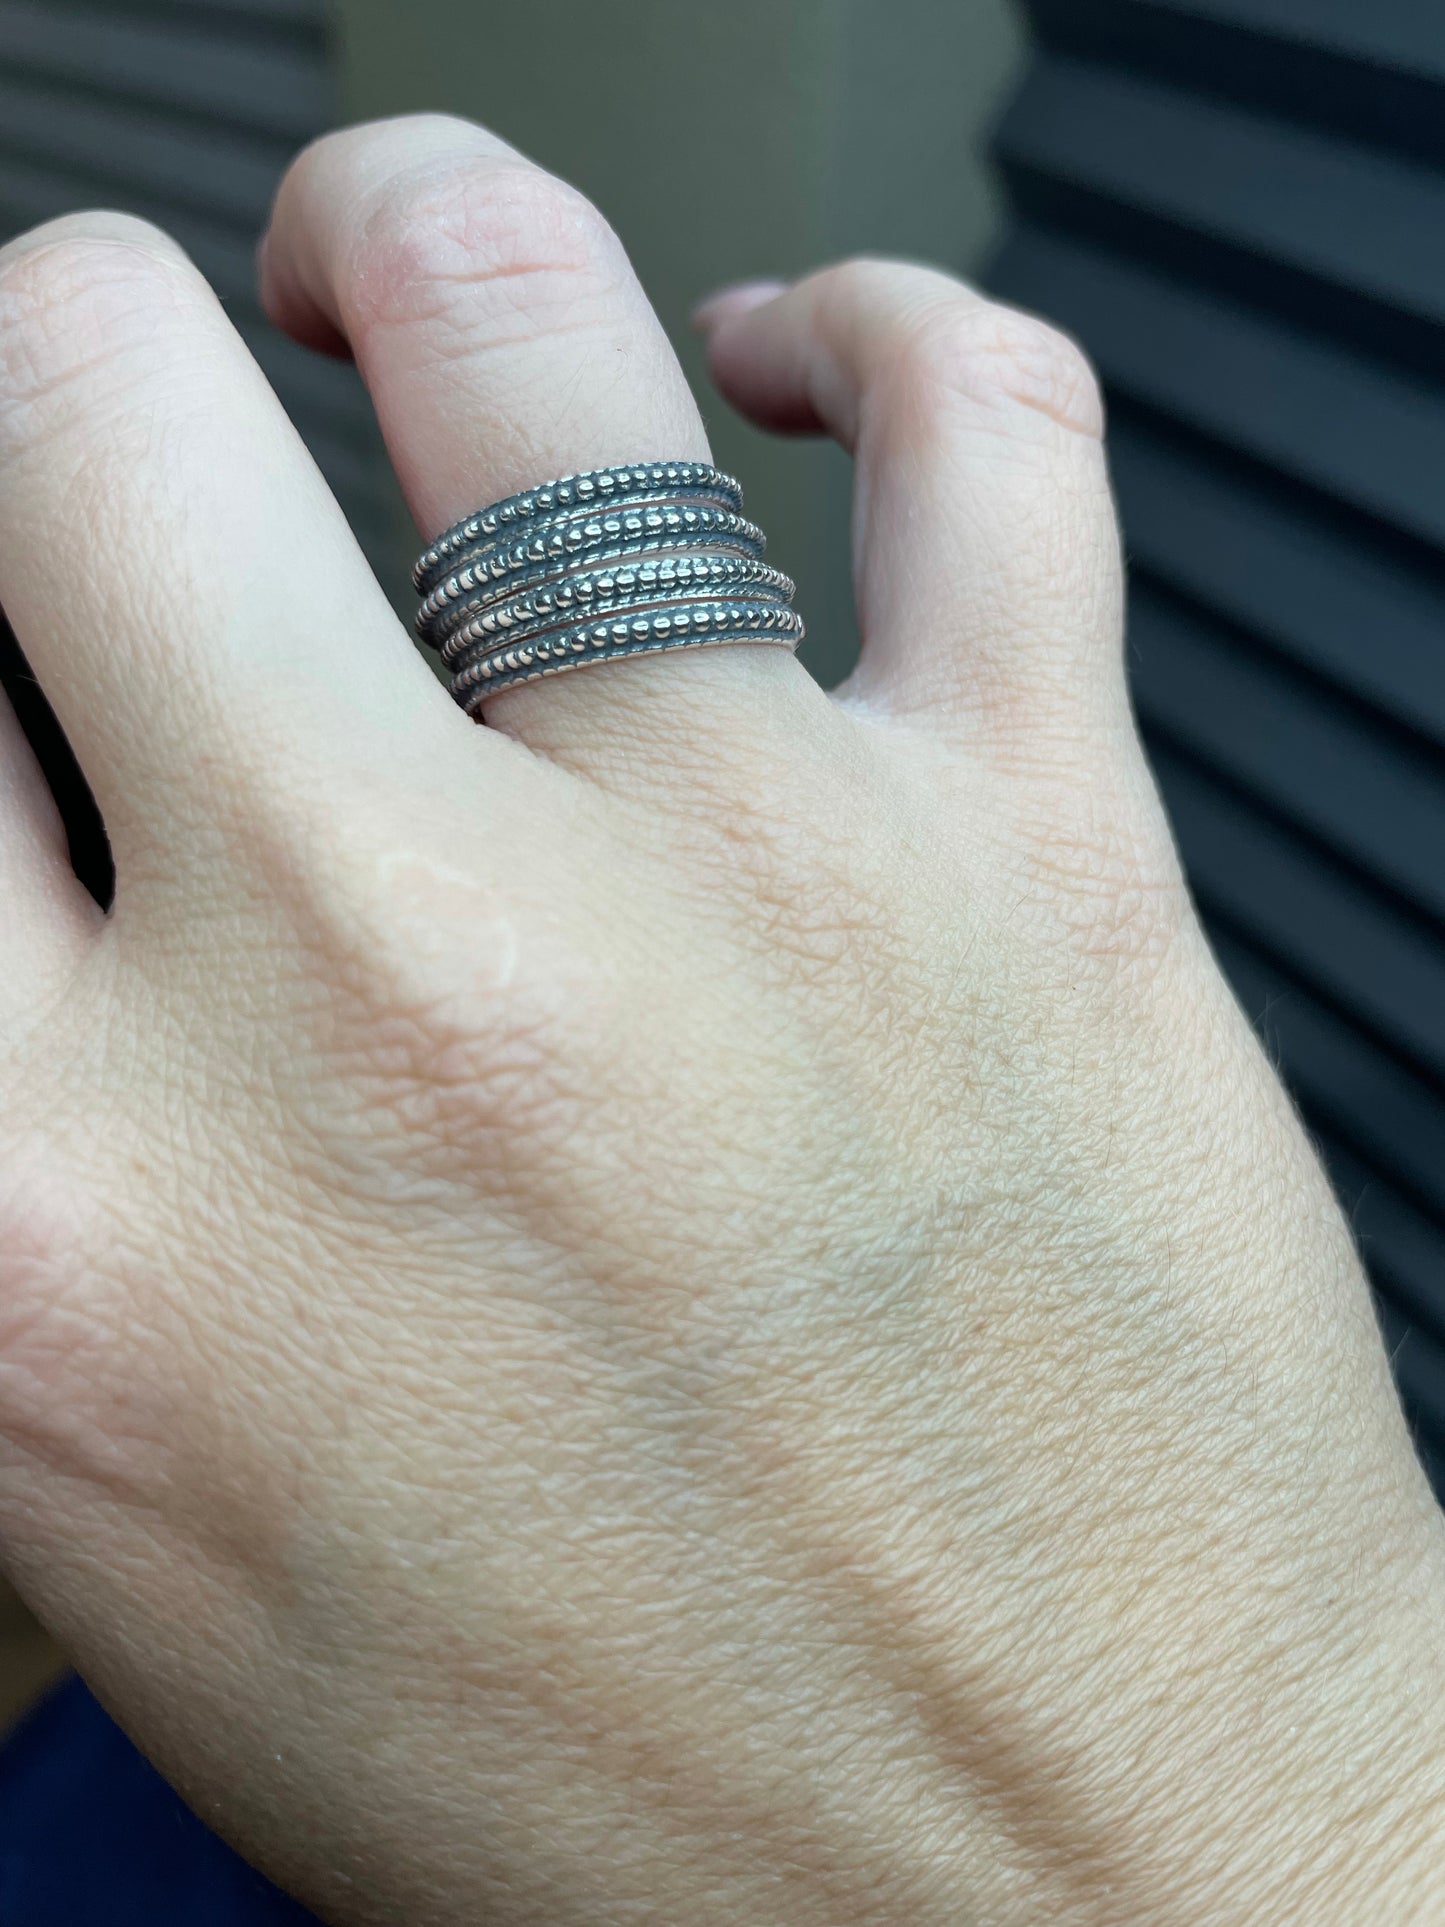 Stackable rings